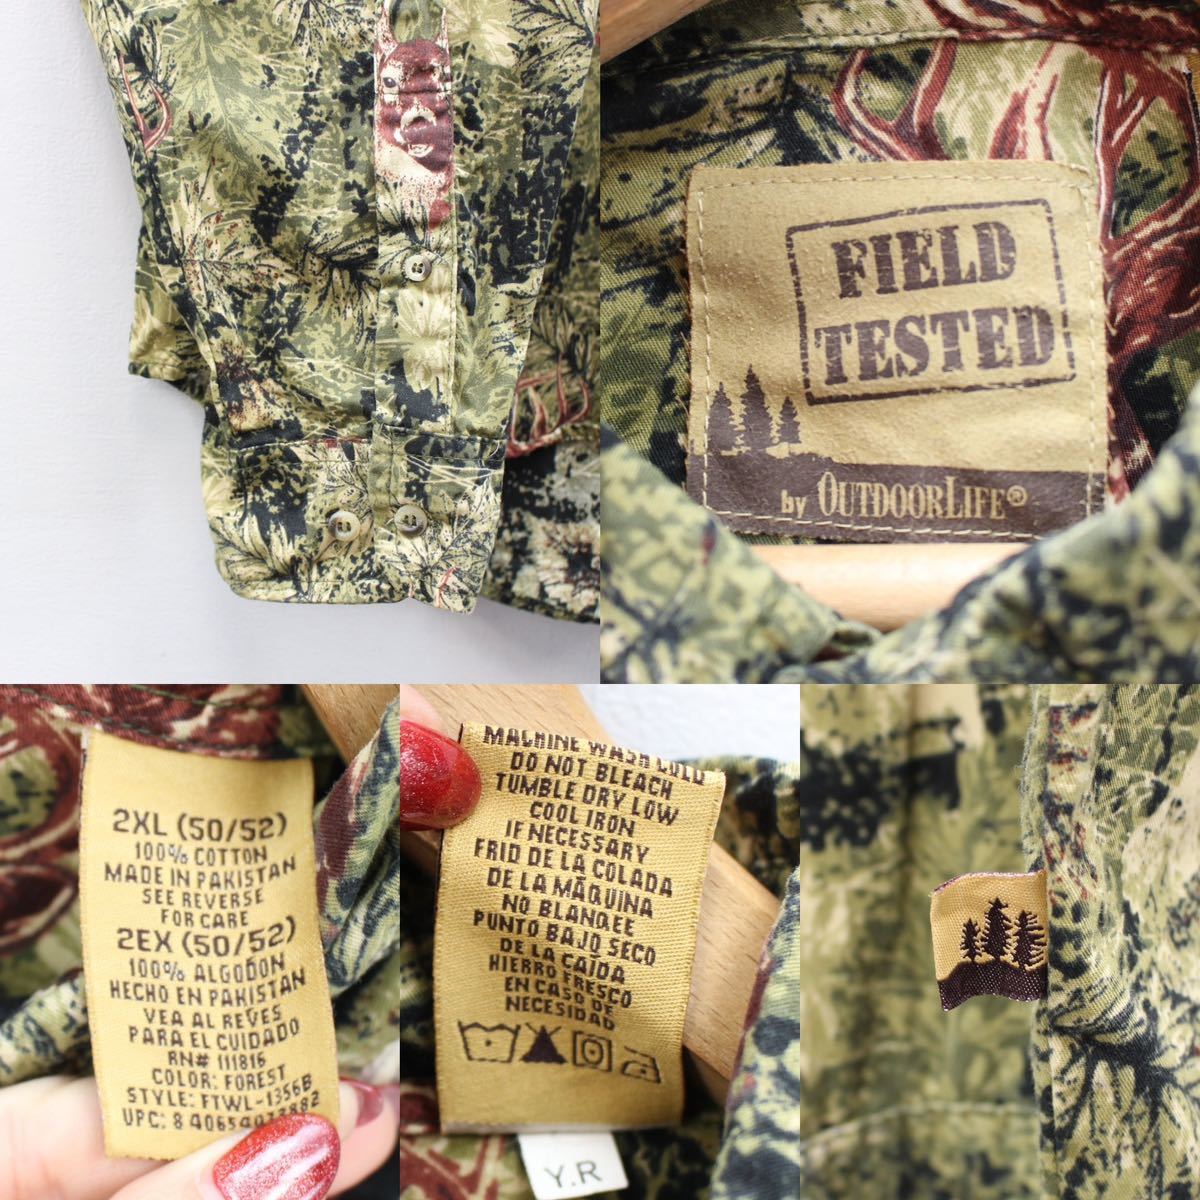 USA VINTAGE FIELD TESTED by OUTDOORLIFE ANIMAL PATTERNED DESIGN